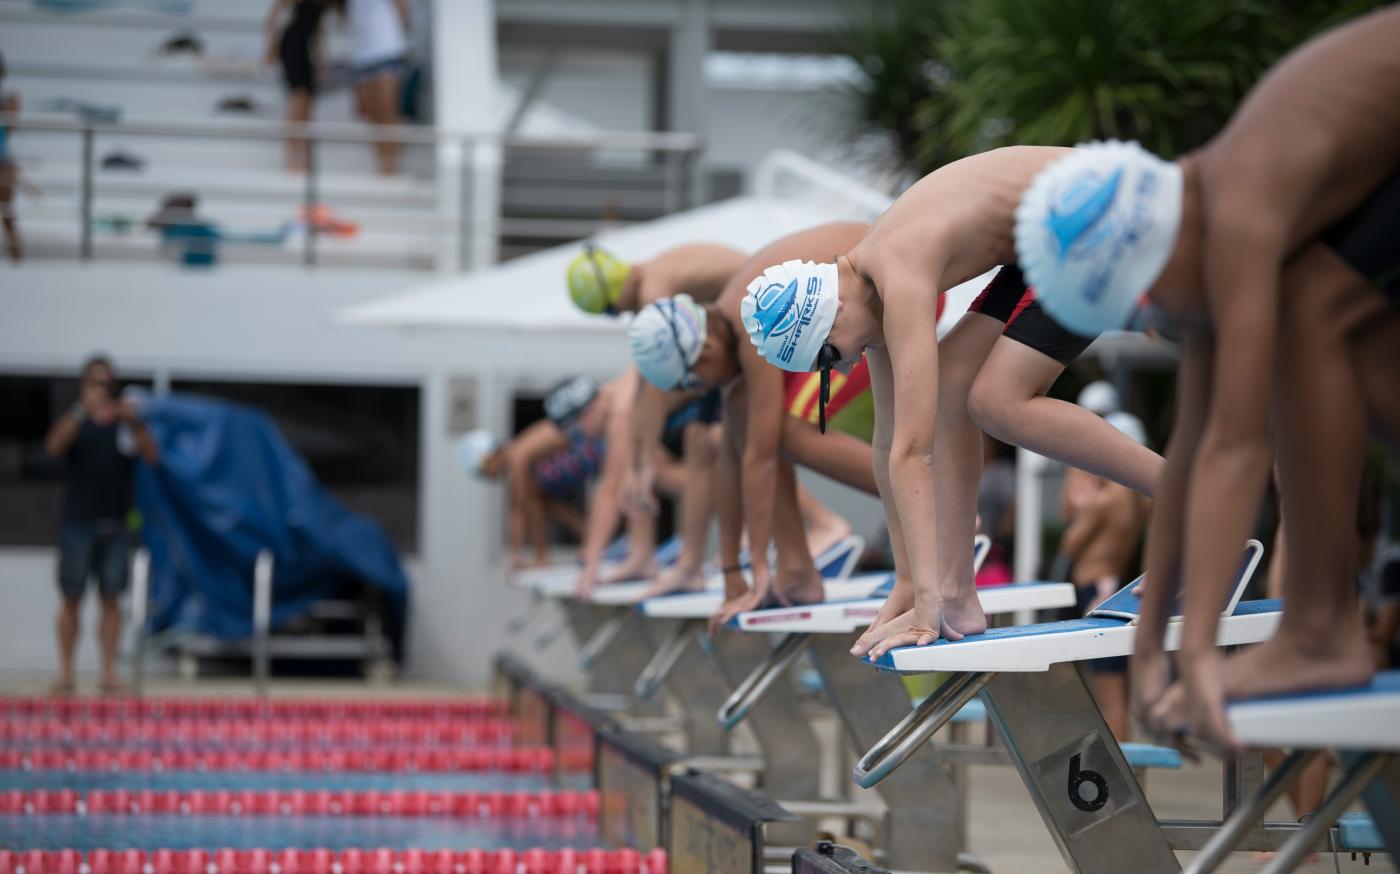 group of men attending on swimming competition by Arisa Chattasa courtesy of Unsplash.